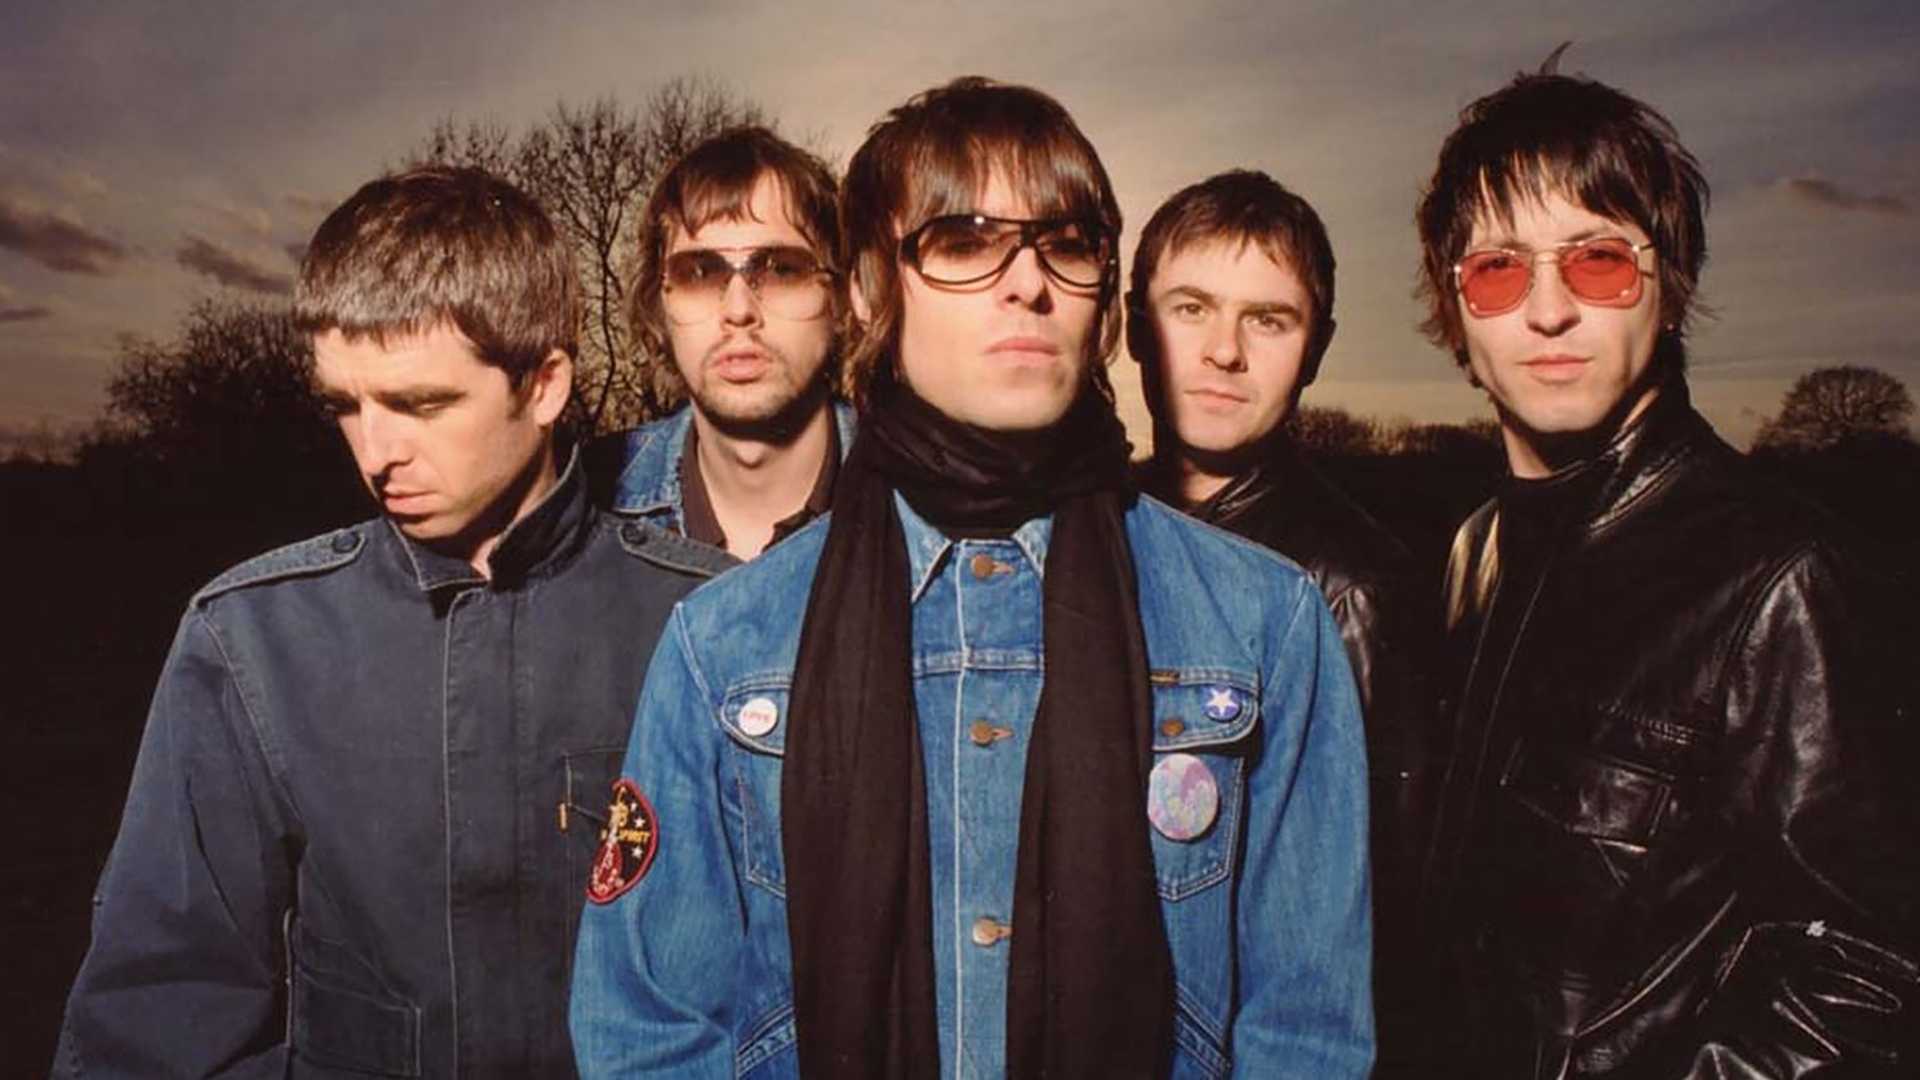 Top 10 oasis songs - classicrockhistory.com